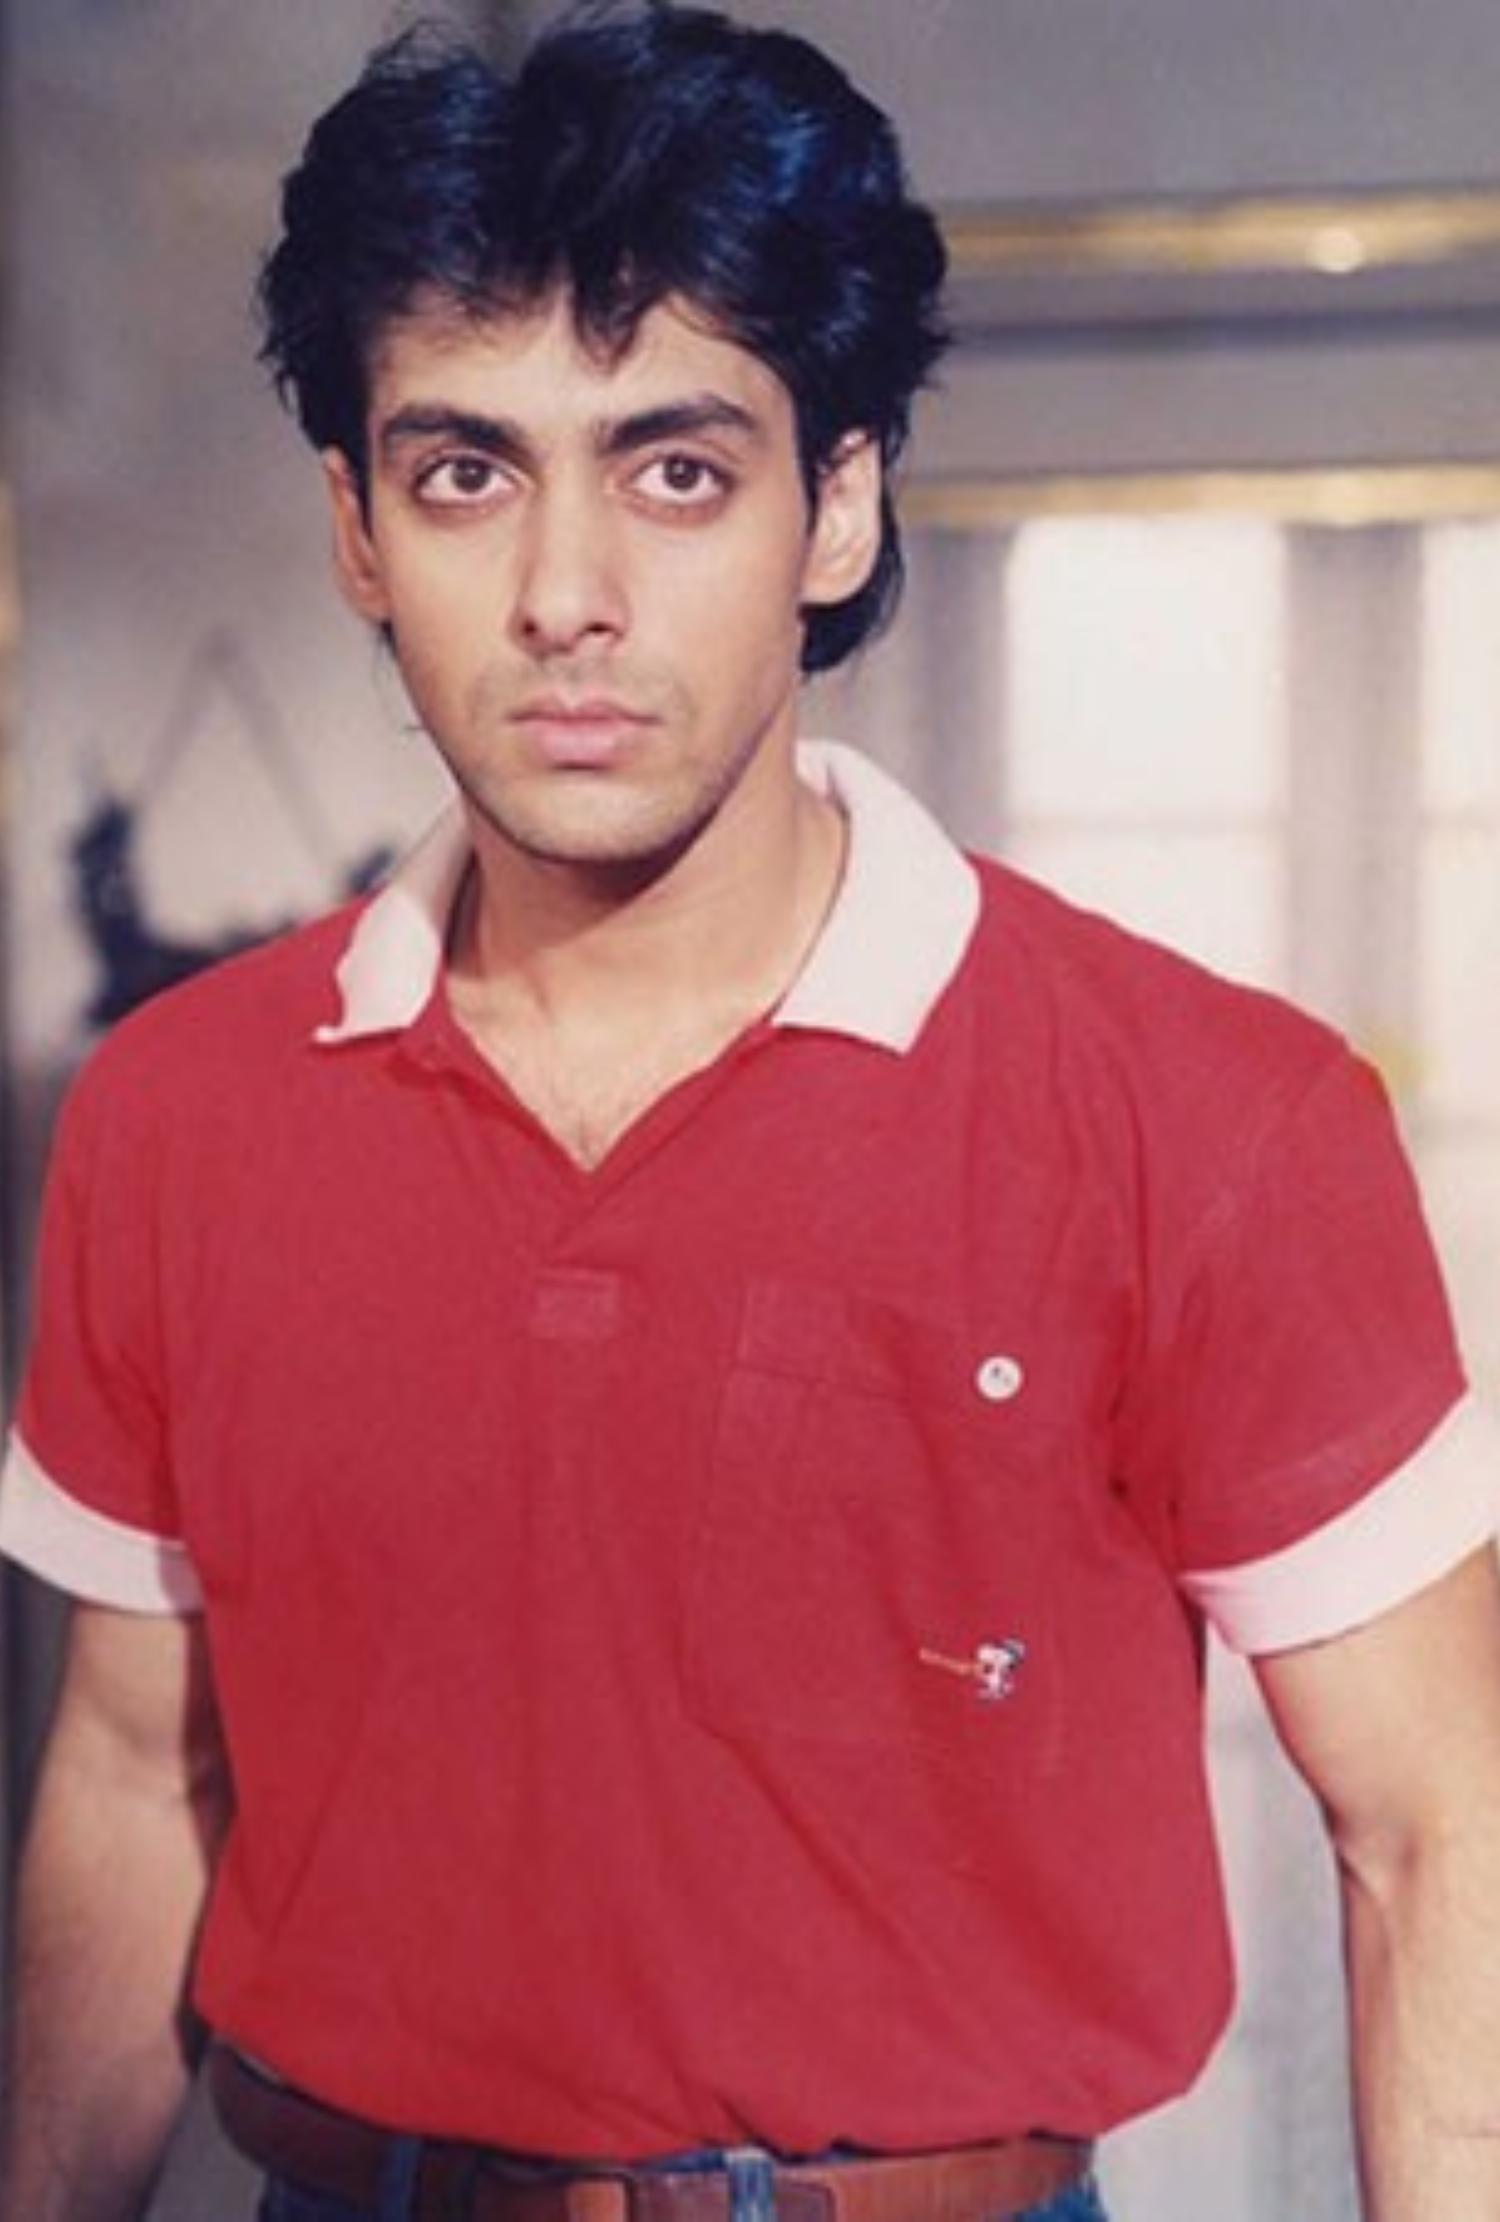 Then: The dashing 'Prem' of the 90s who ruled millions of hearts